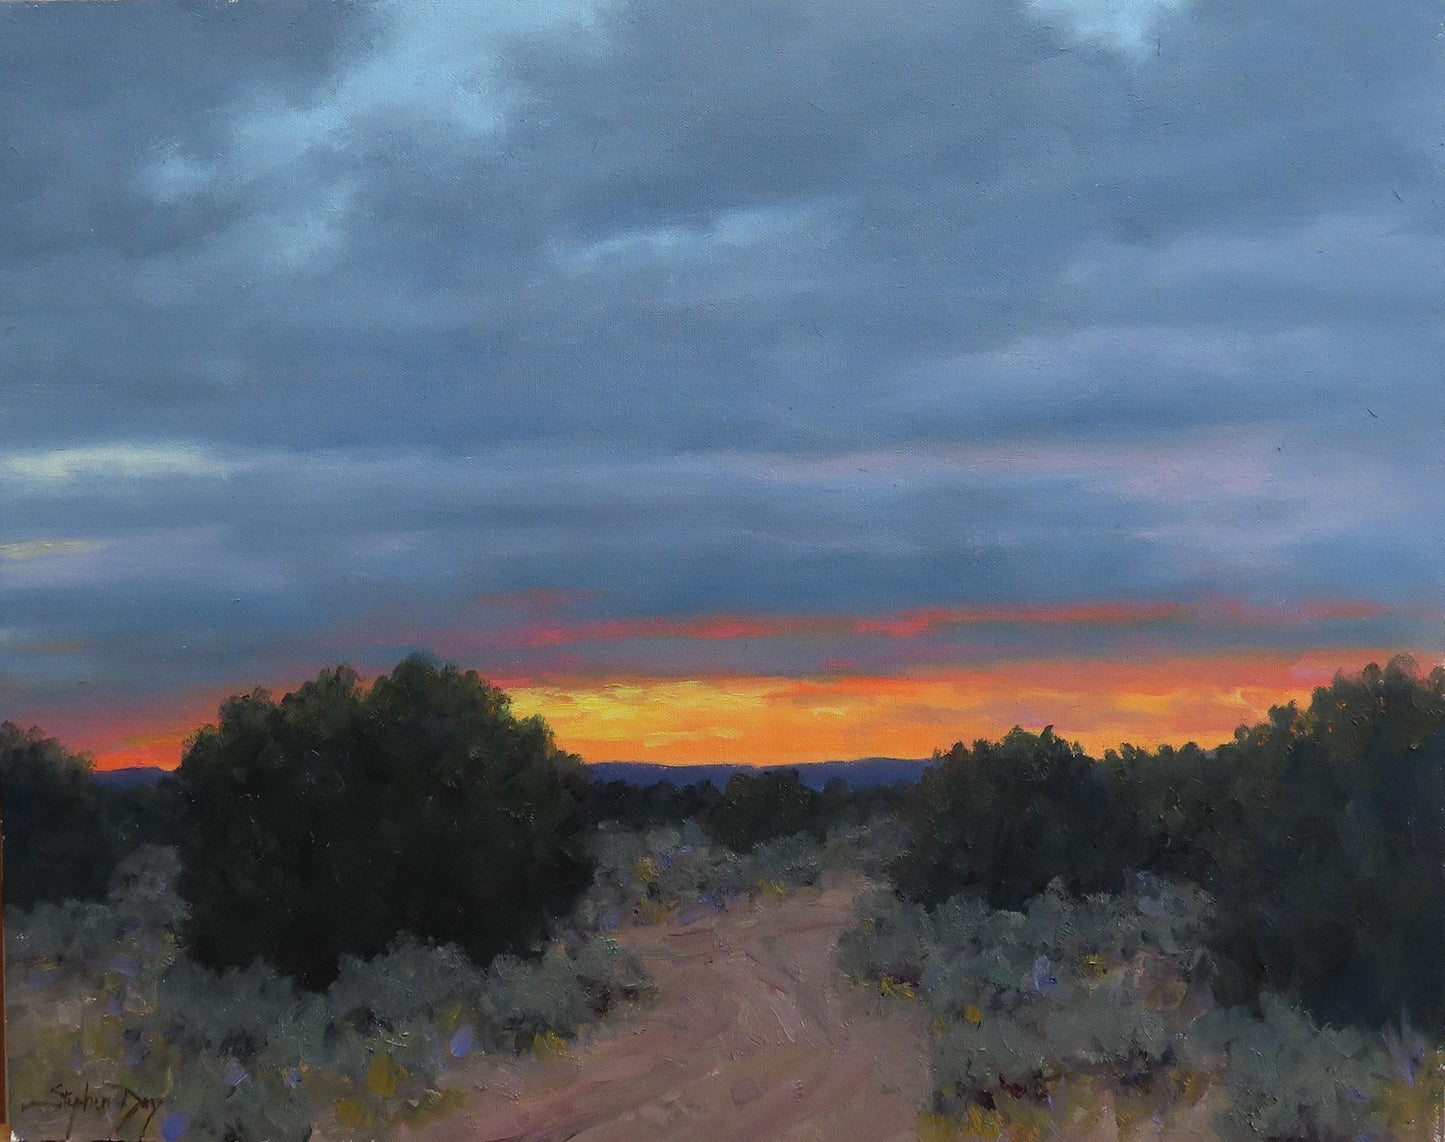 A Passing Glimpse-Painting-Stephen Day-Sorrel Sky Gallery